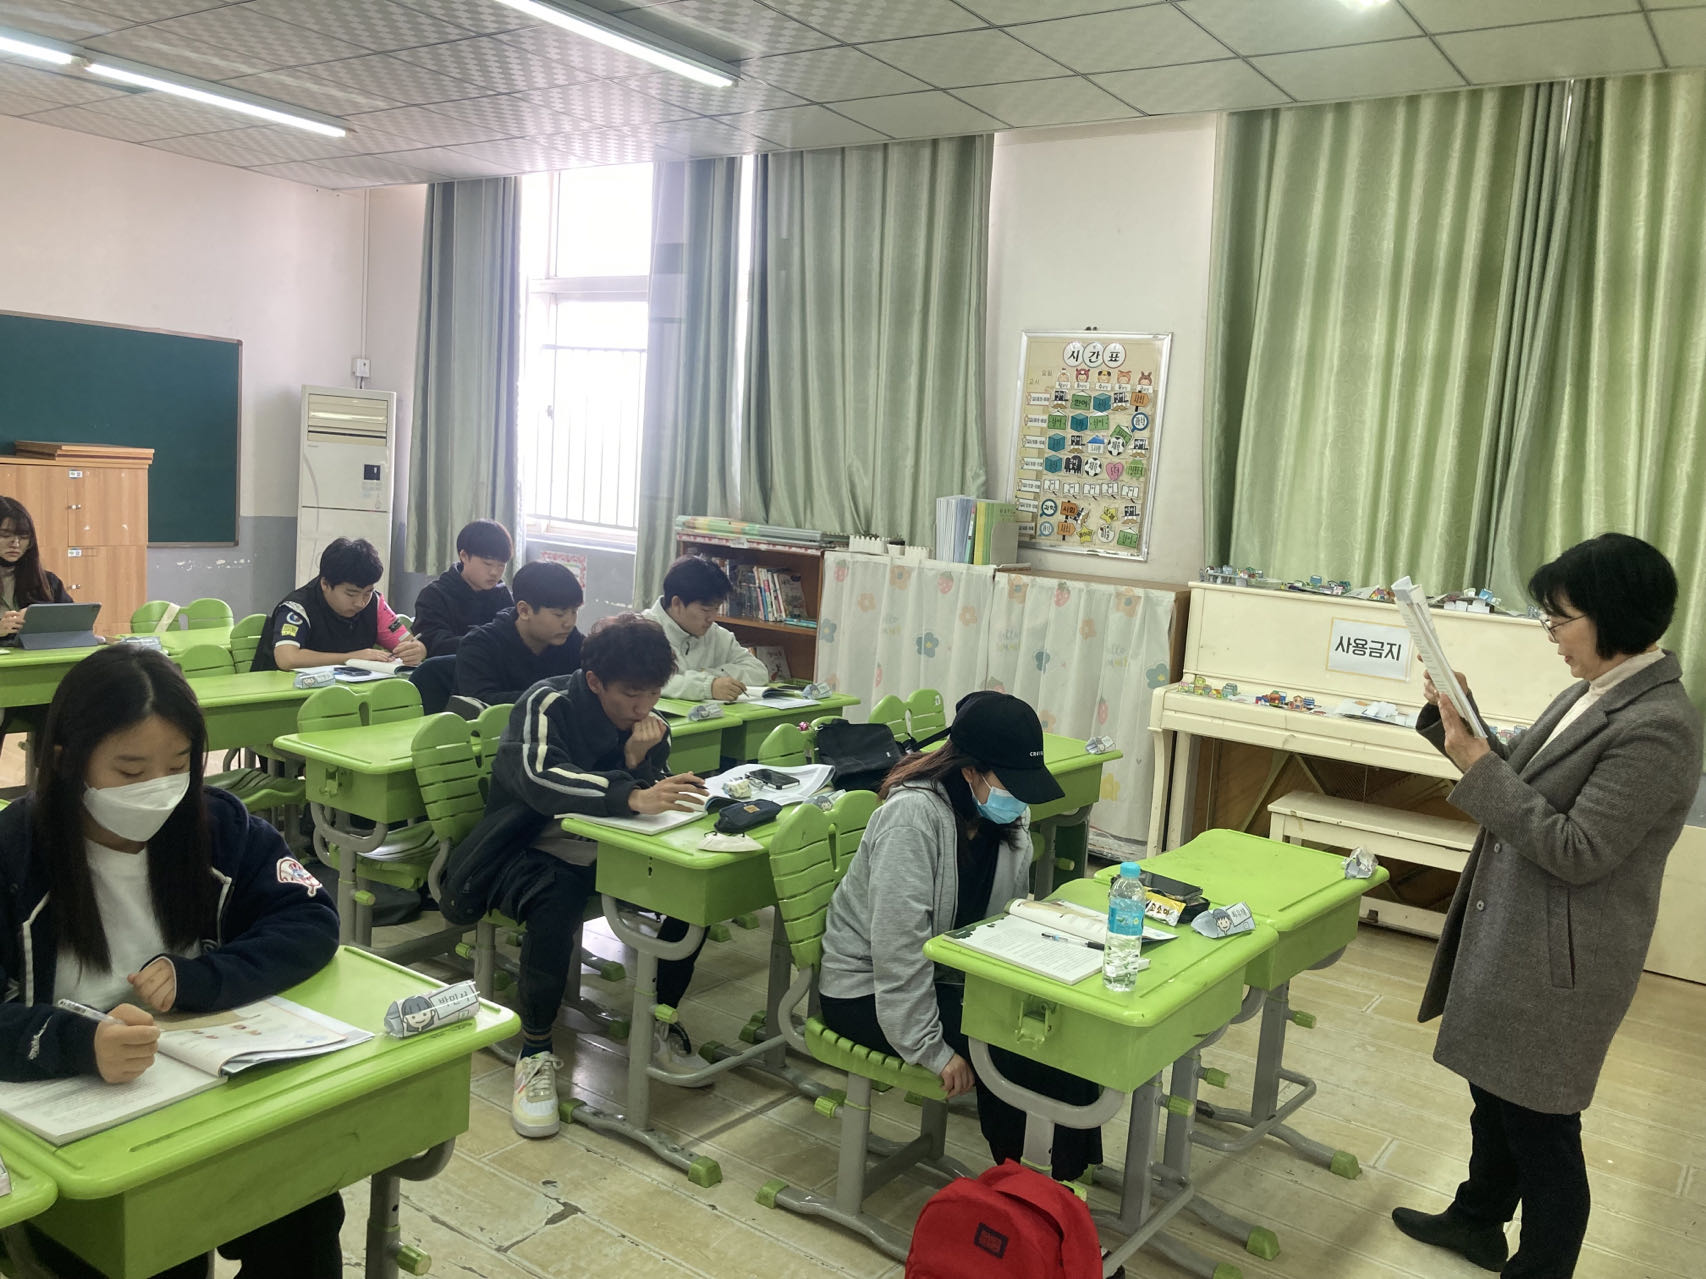 Students of the upper grades take class on the first day of the Hangeul School in Qingdao